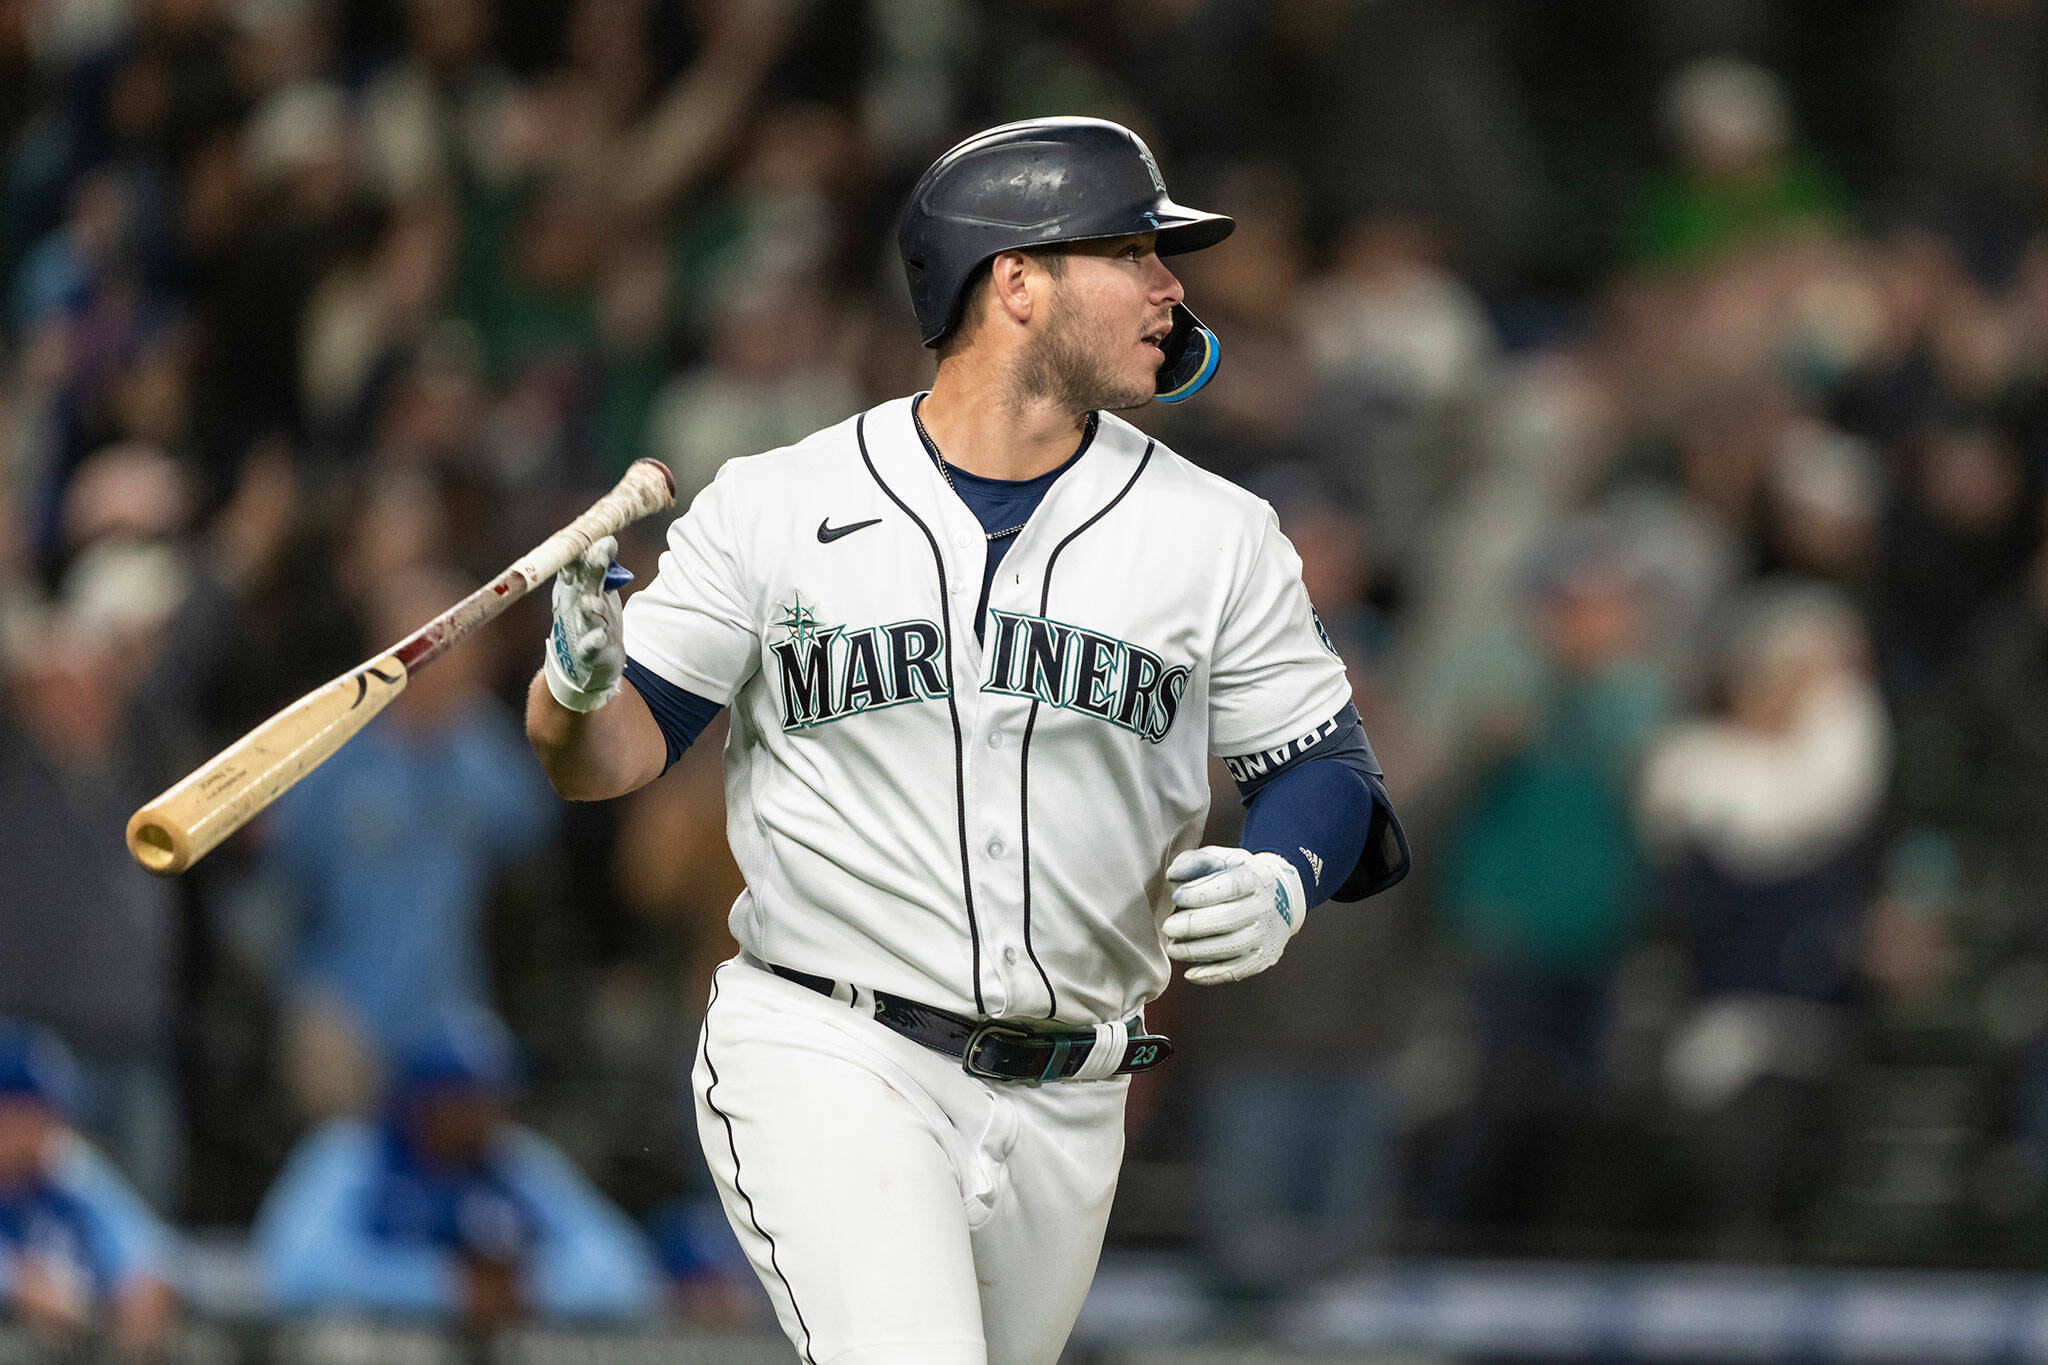 The Mariners’ Ty France flips his bat after hitting a three-run home run during the eighth inning of a game against the Royals on Saturday in Seattle. The Mariners won 13-7. (AP Photo/Stephen Brashear)